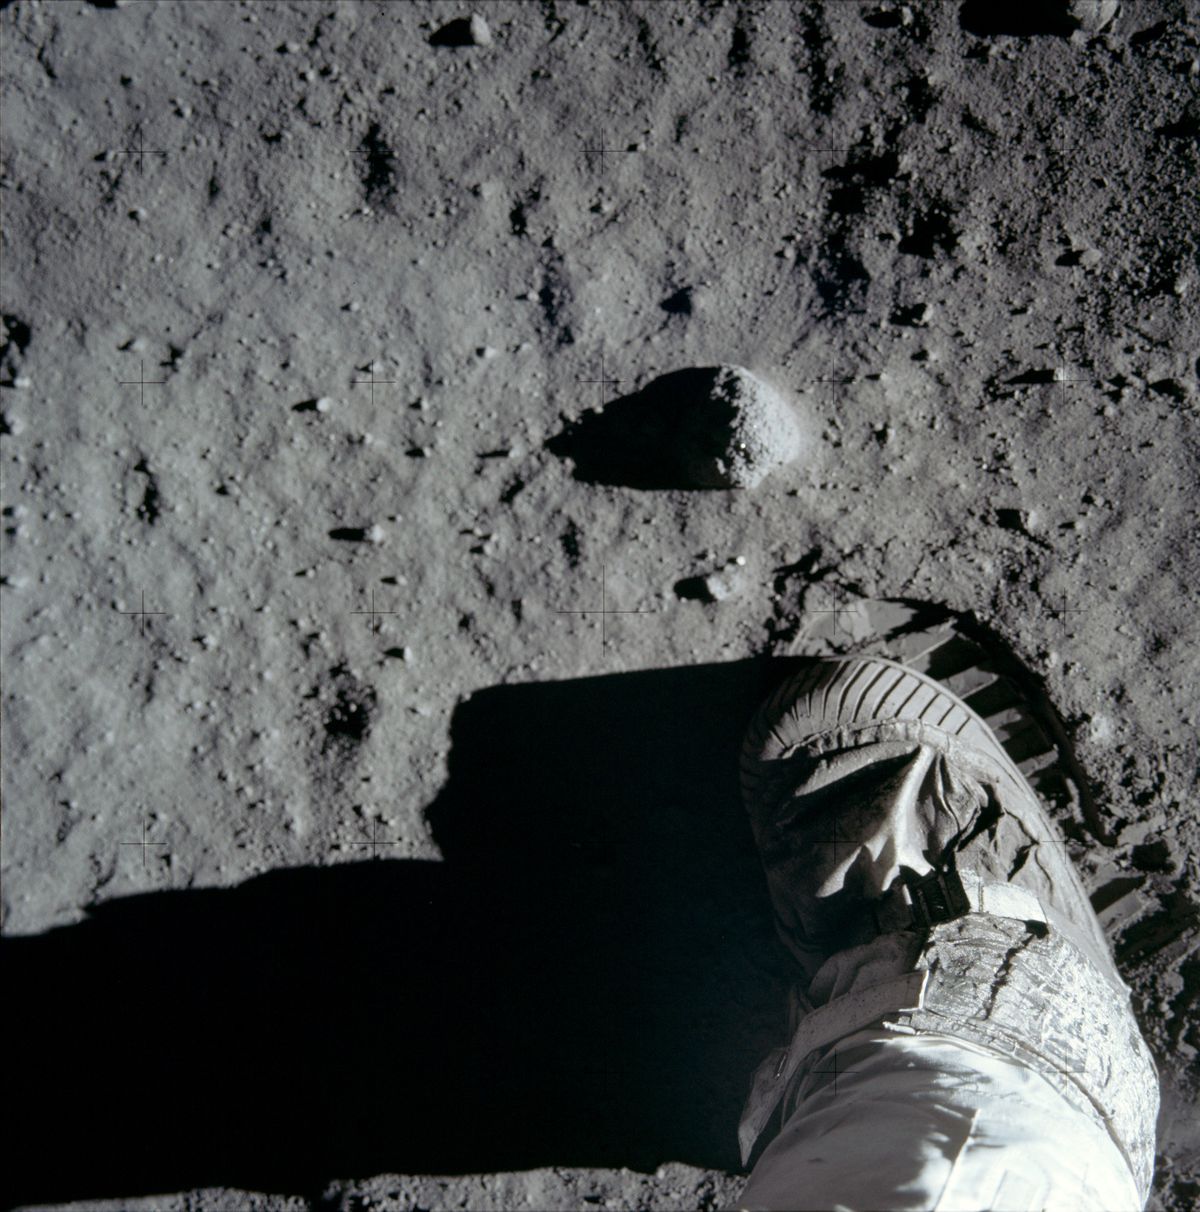 moon landing, moon boot, momentive, space technology, apollo 11, neil armstrong, aerospace, space suit, space boots, silicone expo, silicones, silicone, trade show, elastomers, fluids, resins, gels, silanes, silicon, gaskets, polymers, injection molding, extrusions, sealants, adhesives, lamination, release agent, automotive, aerospace, medical, construction, electronics, mass transit, hvac, converters, testing equipment, hot melting,